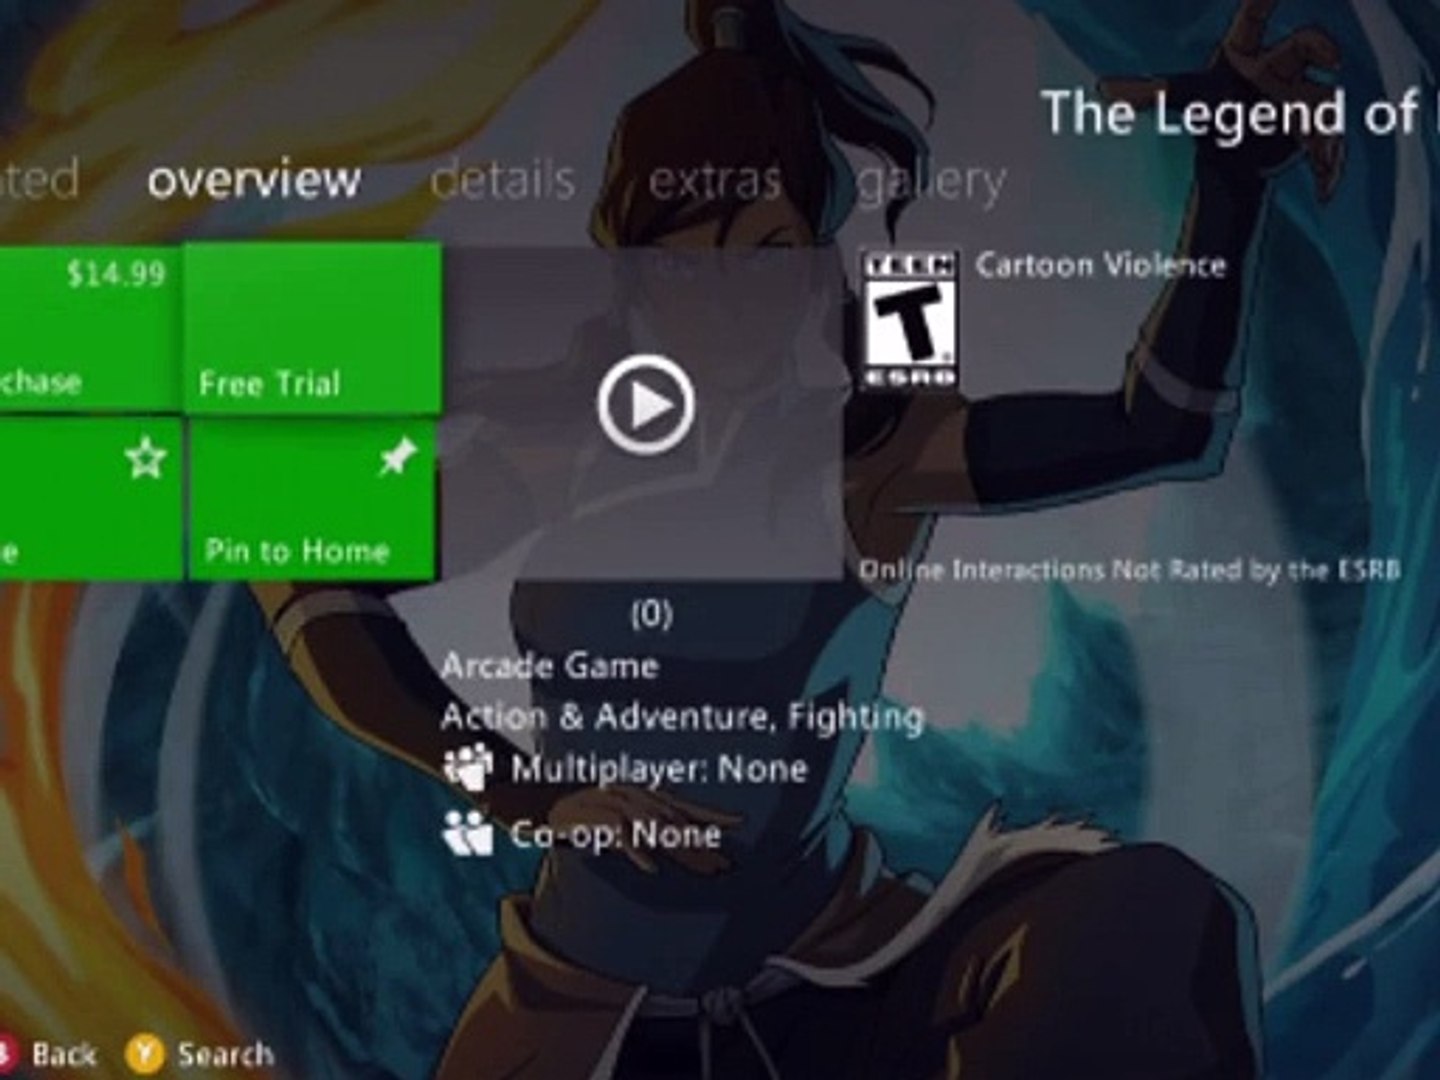 Tutorial For How To Download The Legend Of Korra Trial For Free On Xbox  Live On The Xbox 360 - video Dailymotion